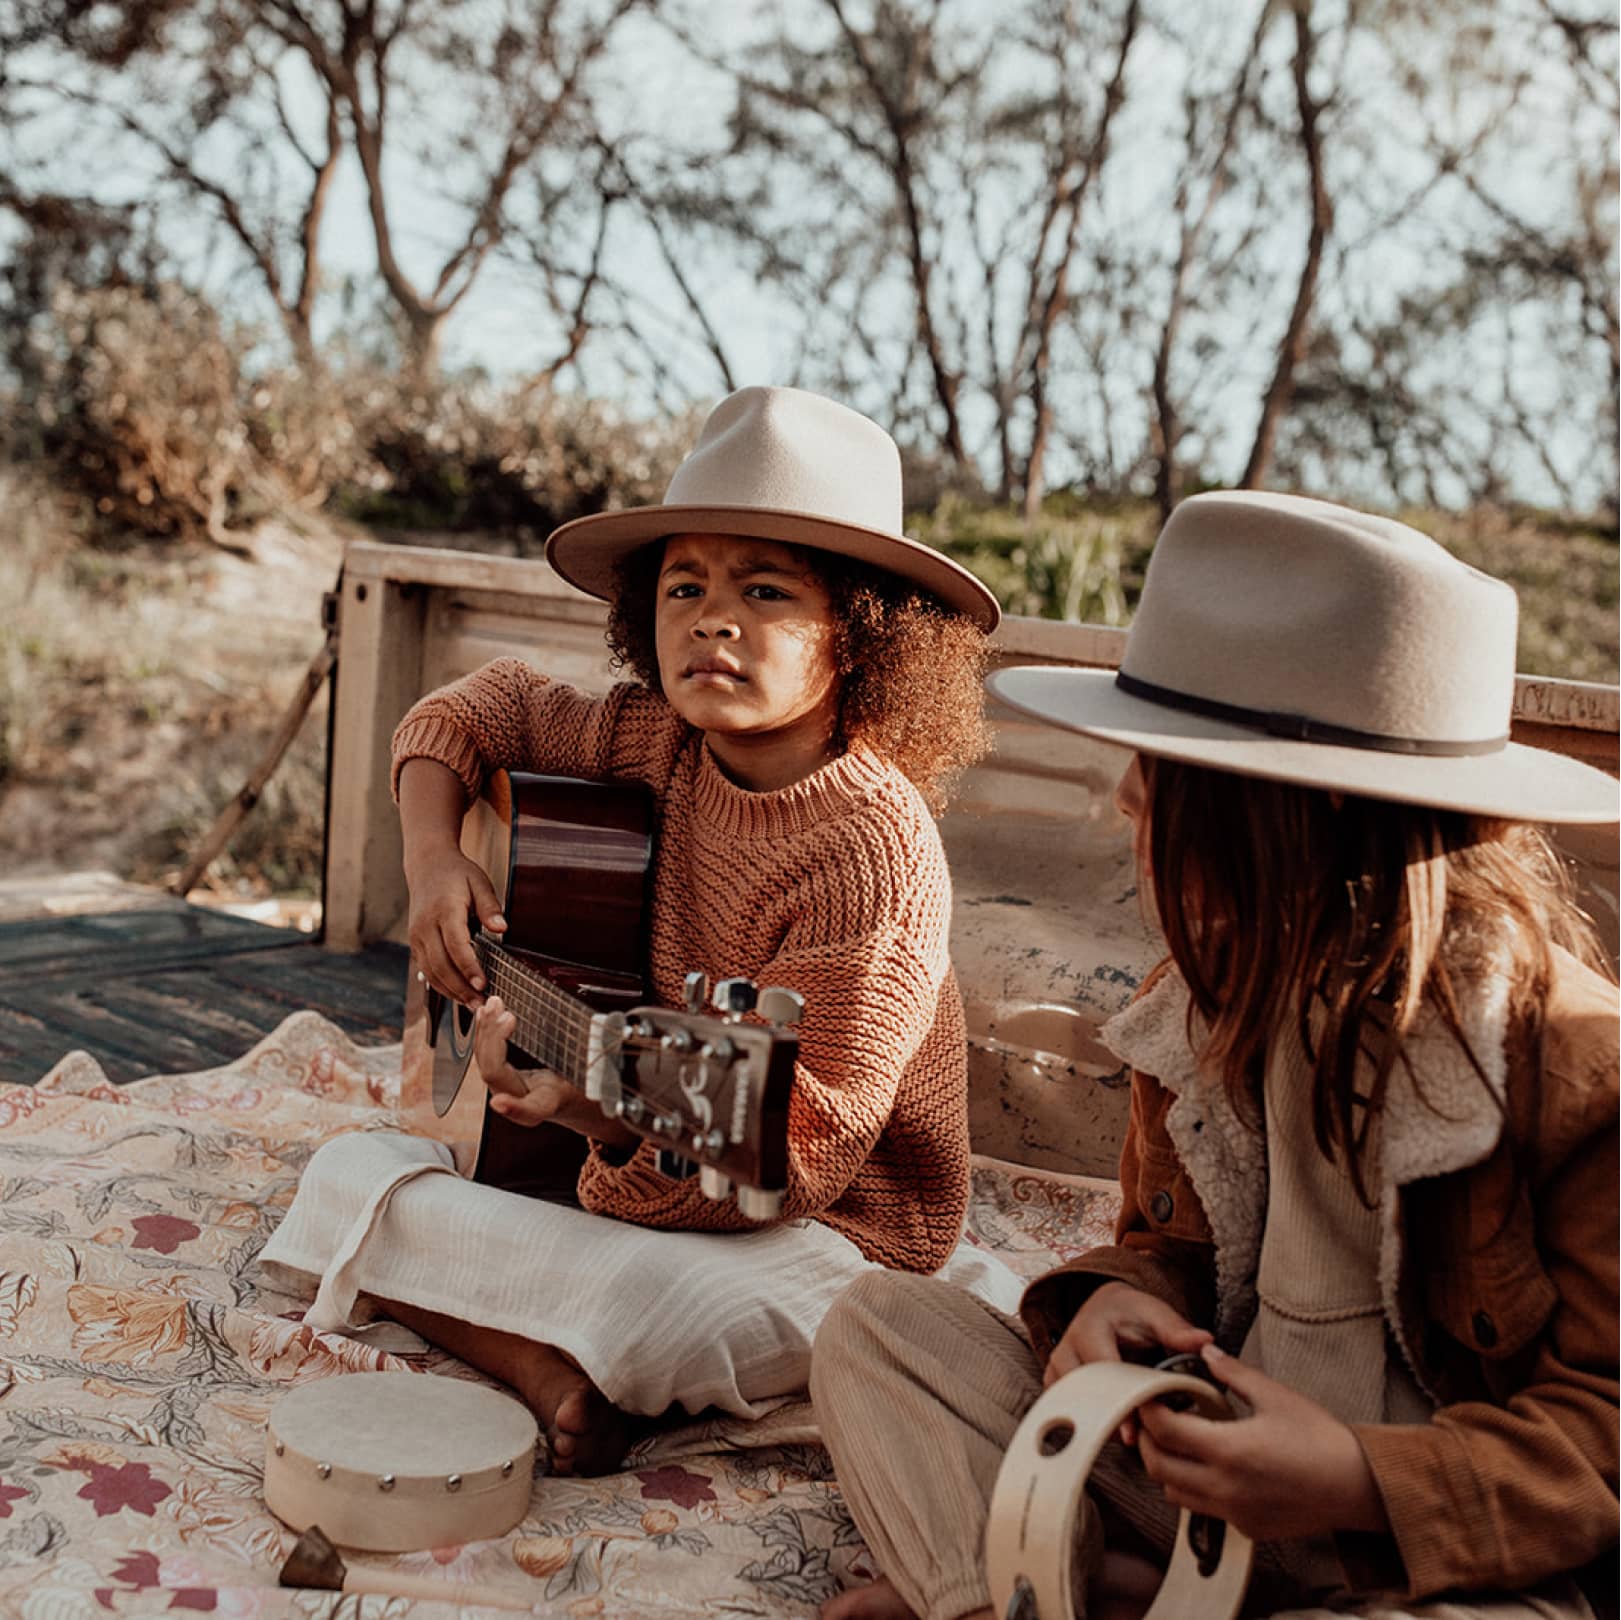 Two children sitting on a picnic rug playing the guitar and tamborine